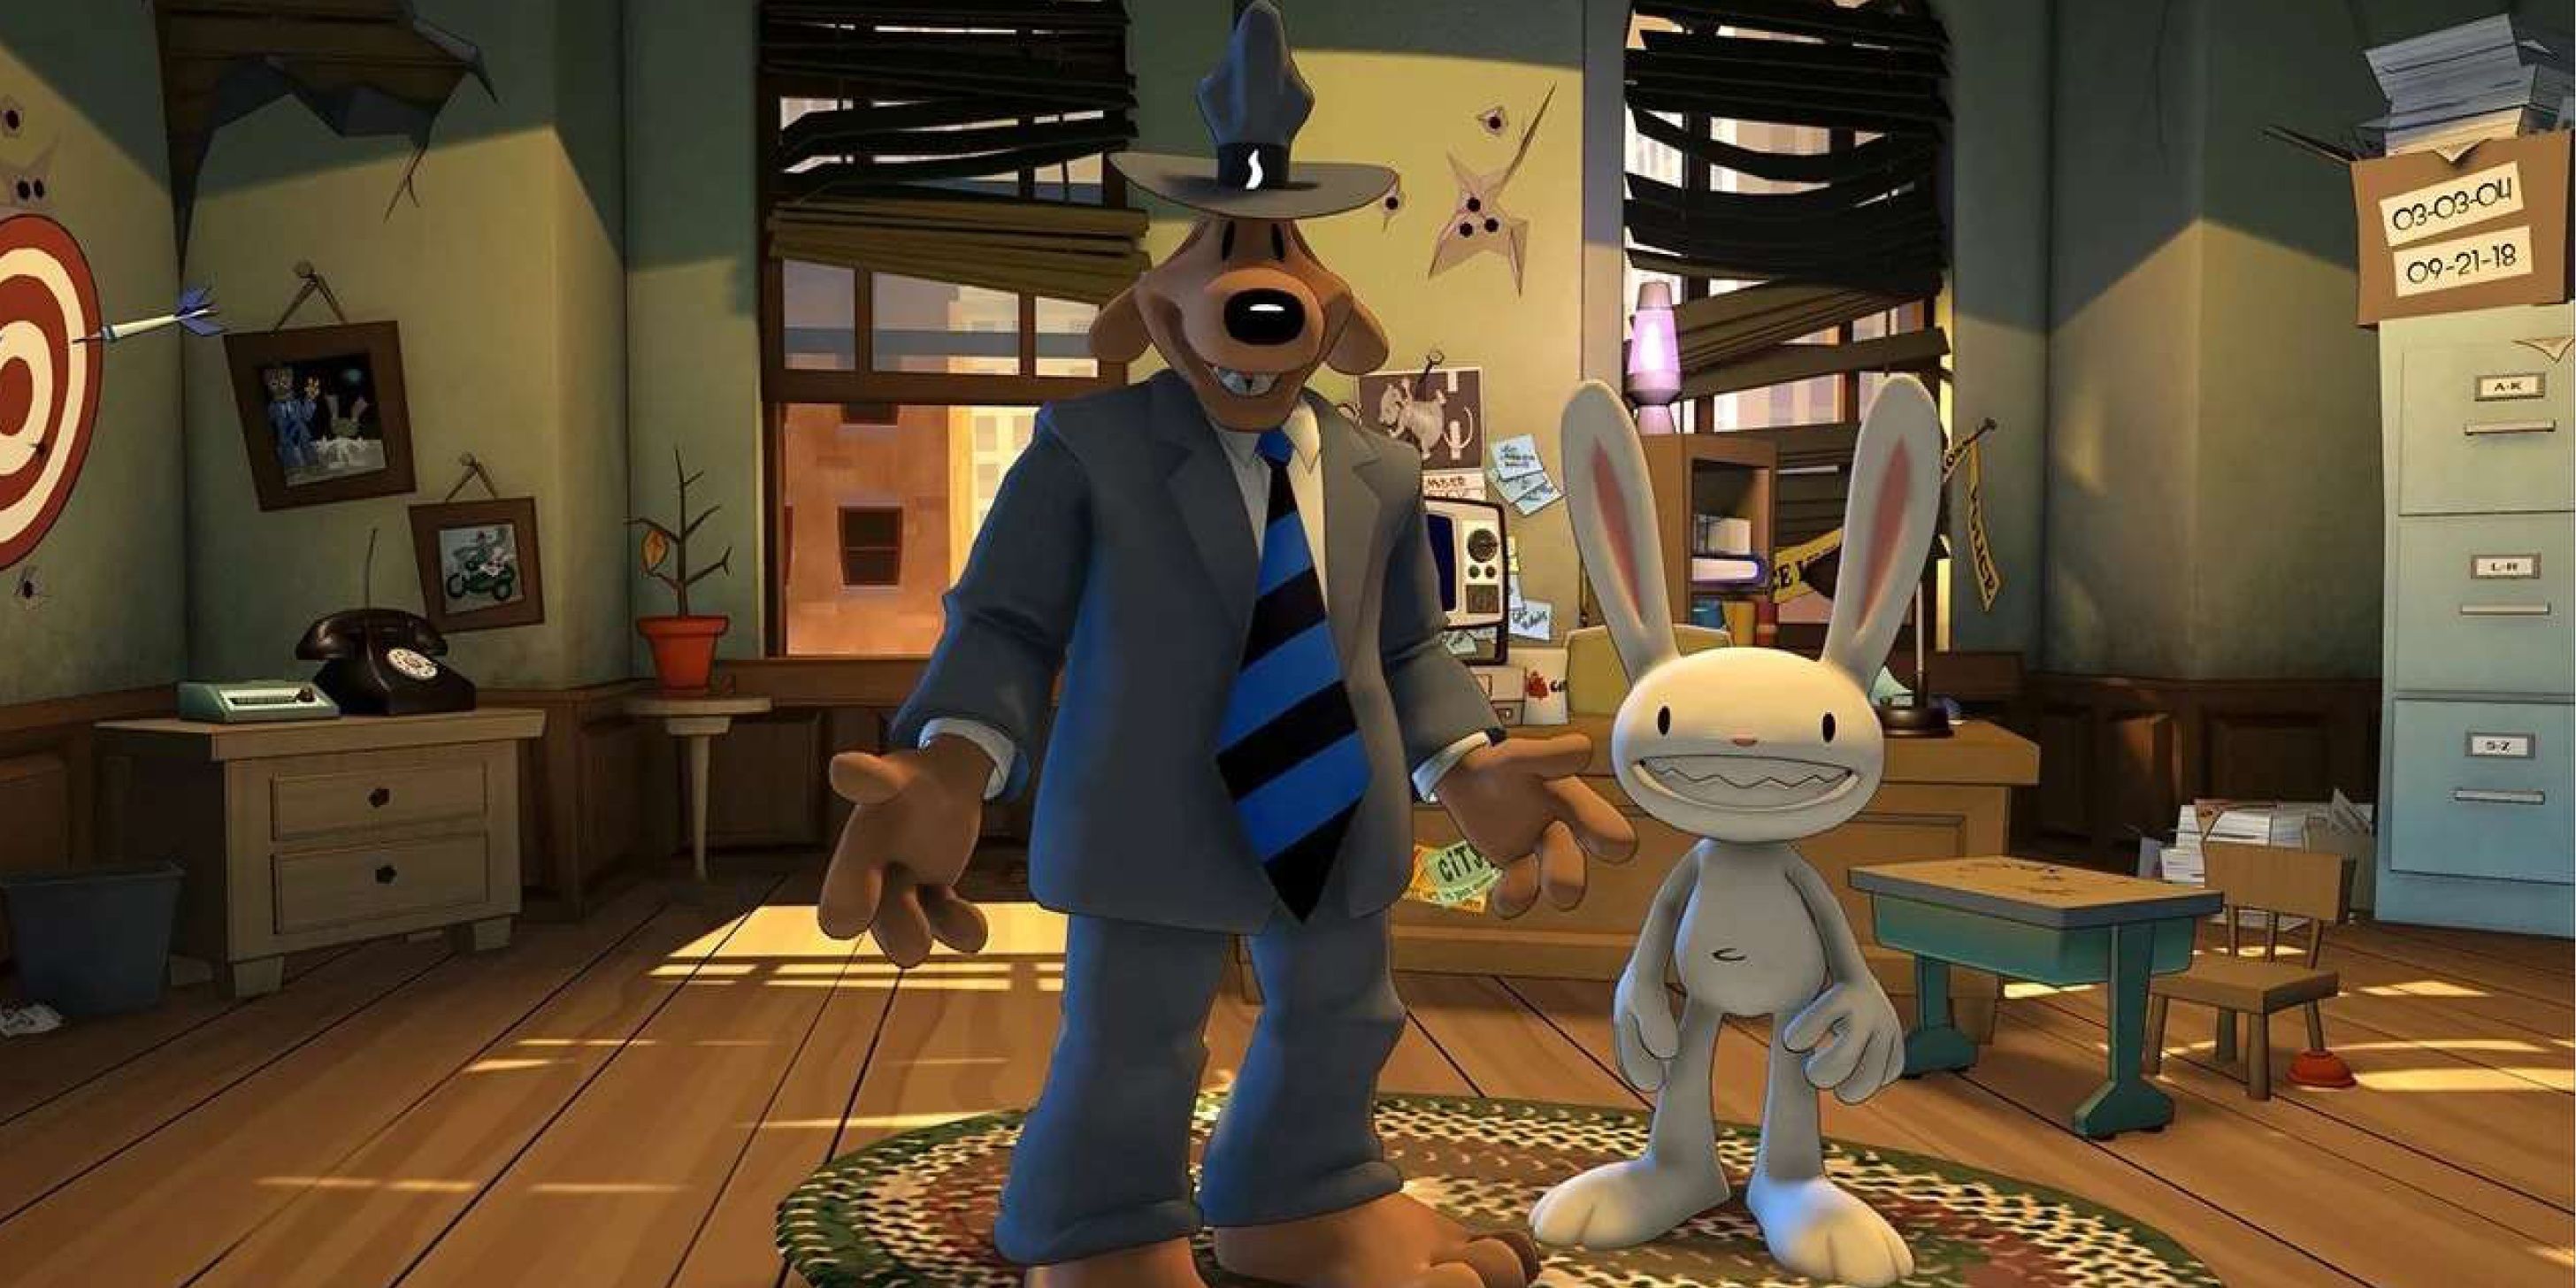 Sam and Max in their office in Sam & Max Save the World